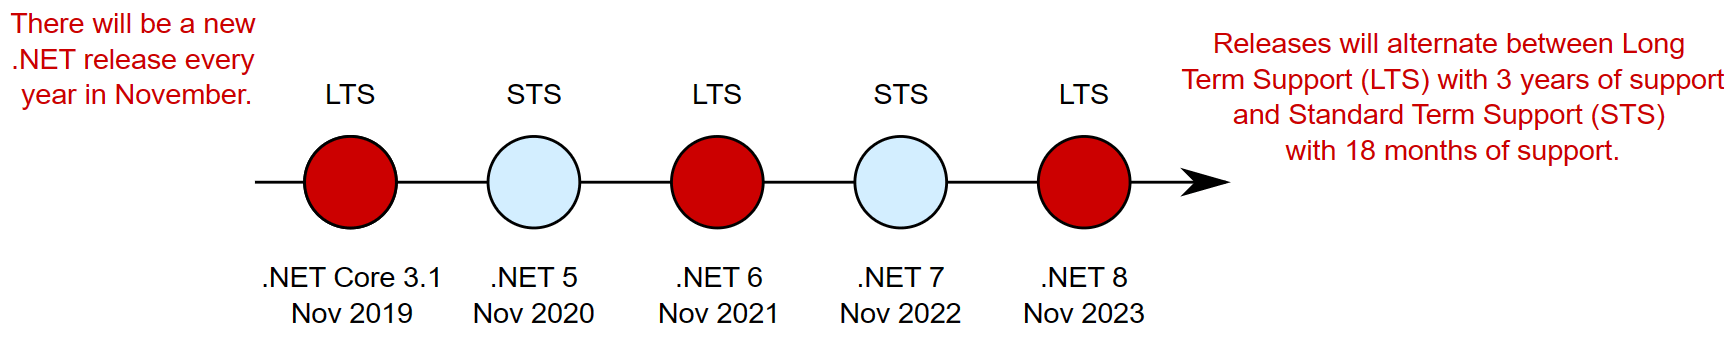 Image showing the timeline for releases of new .NET versions.